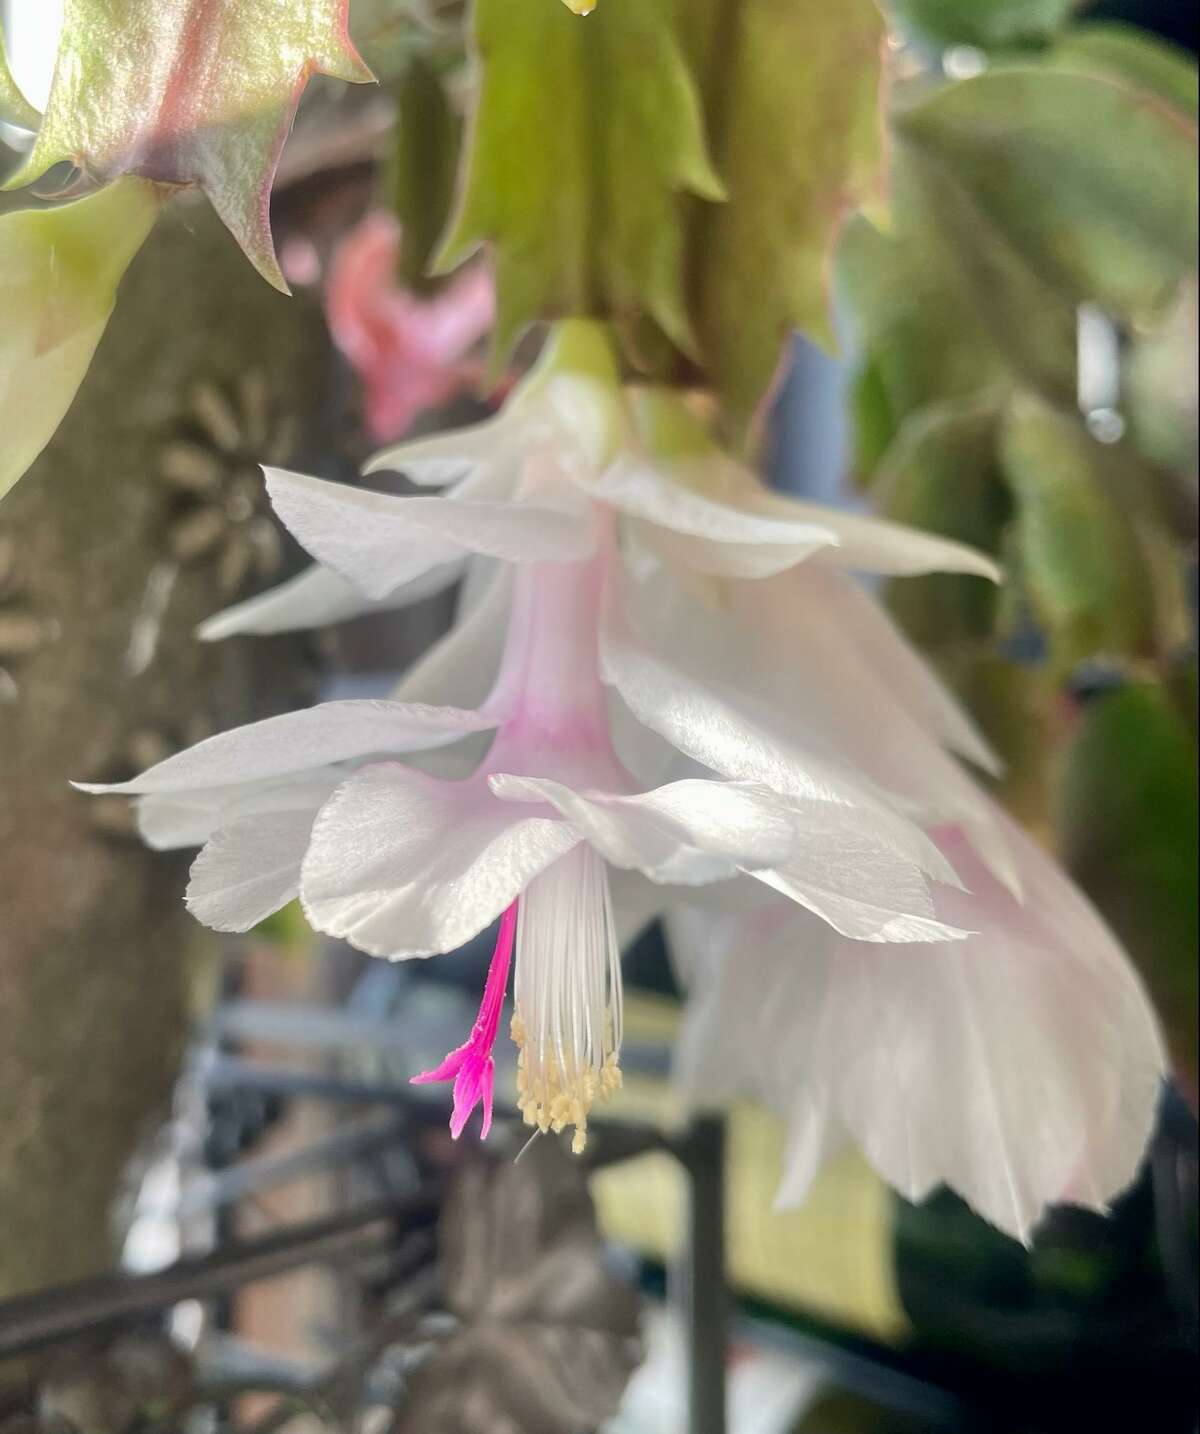 Thanksgiving cactus can rebloom out of season. This only strengthens our attachment to the plant if given by a loved one.